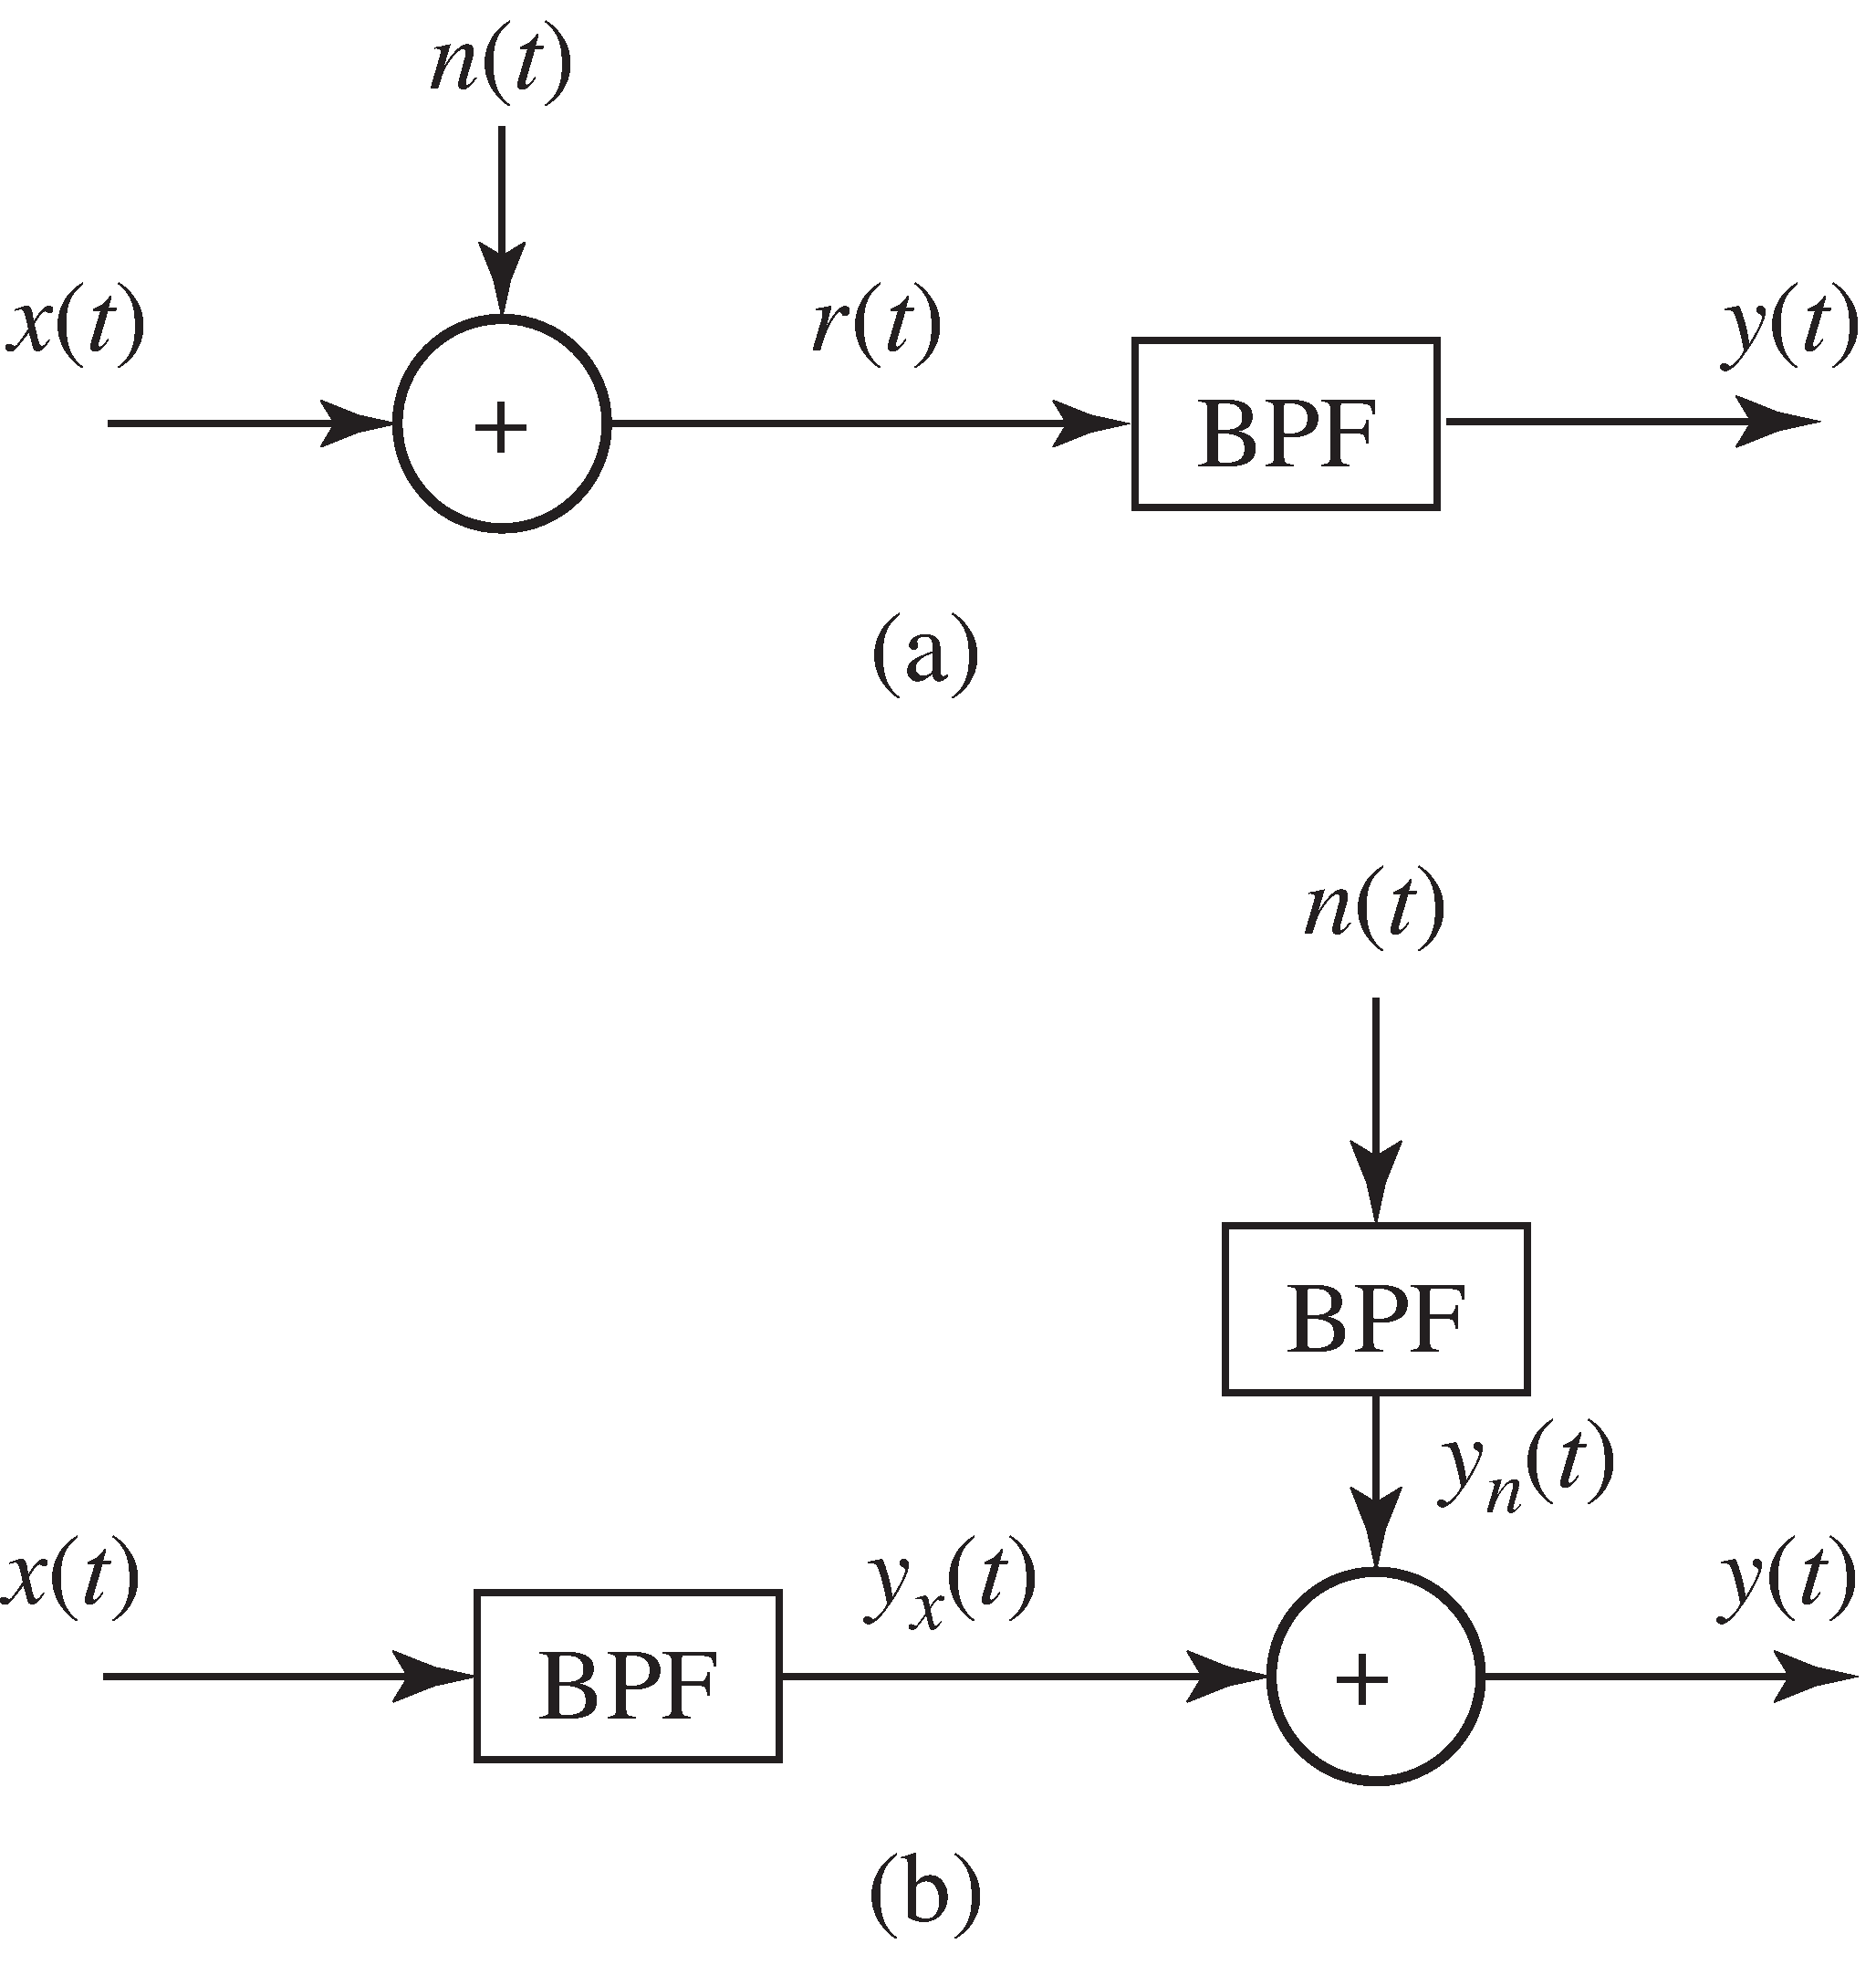 Two equivalent ways to draw the same system. In part (a) it is easy to calculate the SNR at the input, while the alternative form (b) allows easy calculation of the SNR at the output of the BPF.